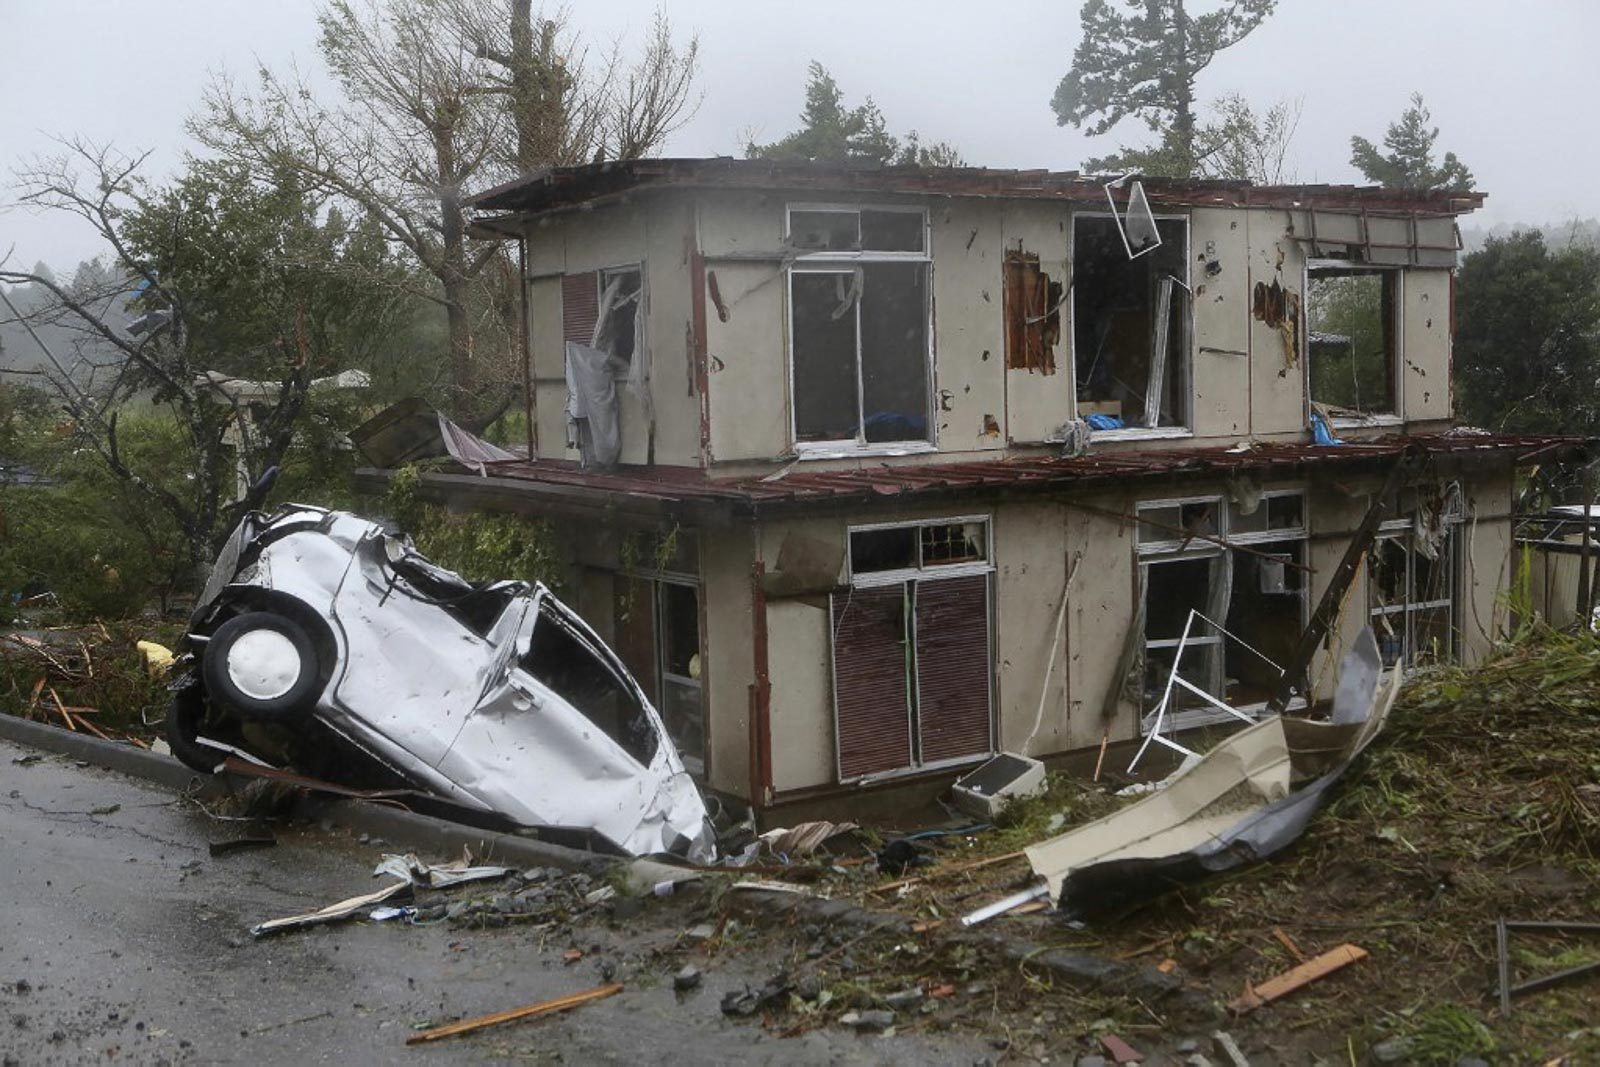 DESTRUCTION. A damaged vehicle sits in a ditch next to a badly damaged house after strong winds brought by Typhoon Hagibis hit the area in Ichihara, Chiba prefecture on October 12, 2019. Photo by Jiji Press/AFP  